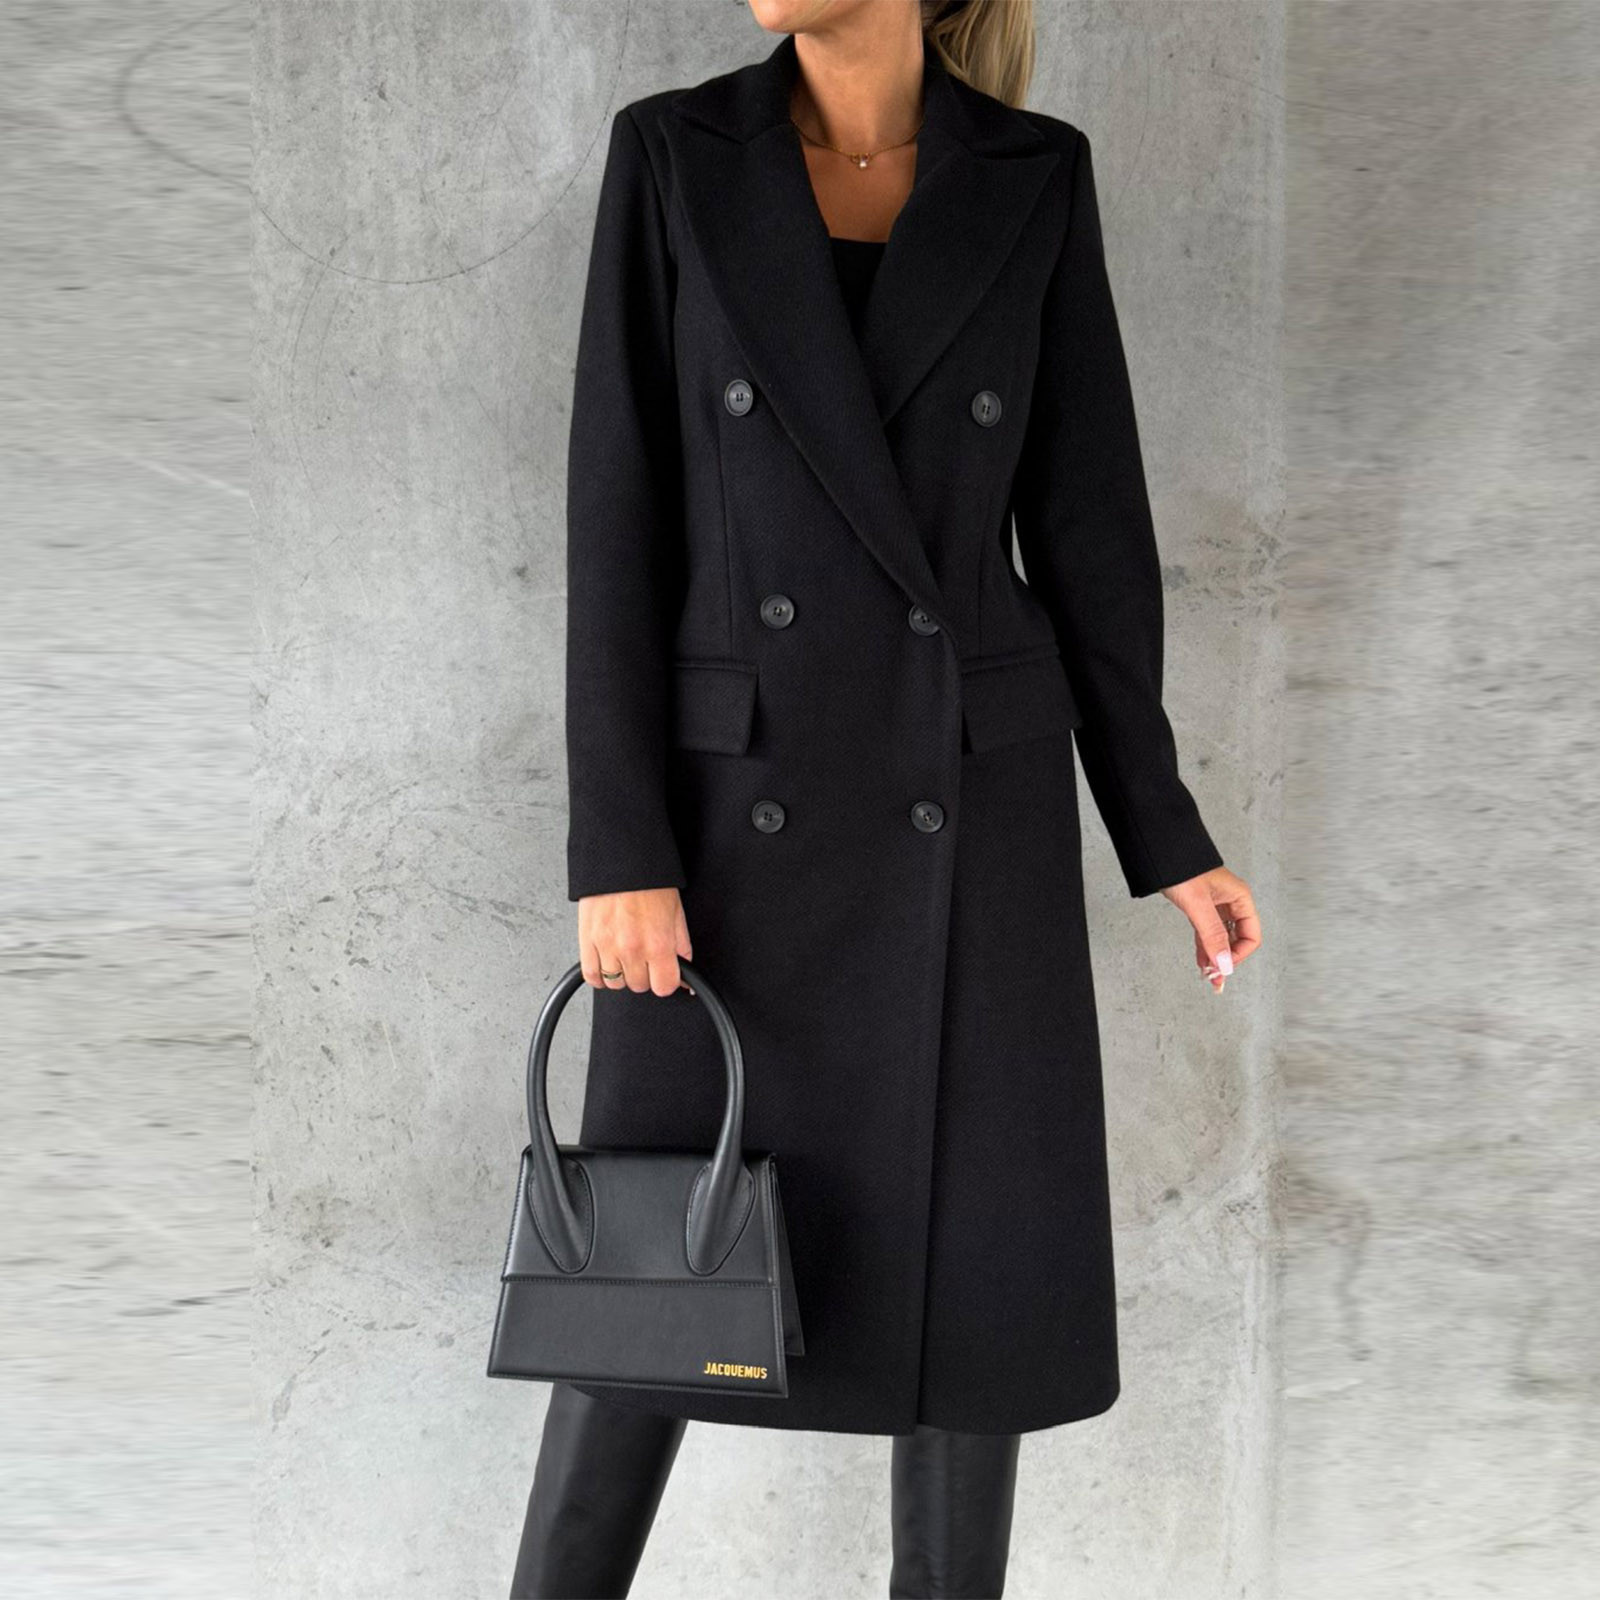 Hfyihgf Women's Double Breasted Trench Coat Classic Notch Collar Long Sleeve Peacoats Winter Warm Slim Fit Long Woolen Jackets Coat with Pockets Clearance(Black,M) - image 2 of 5